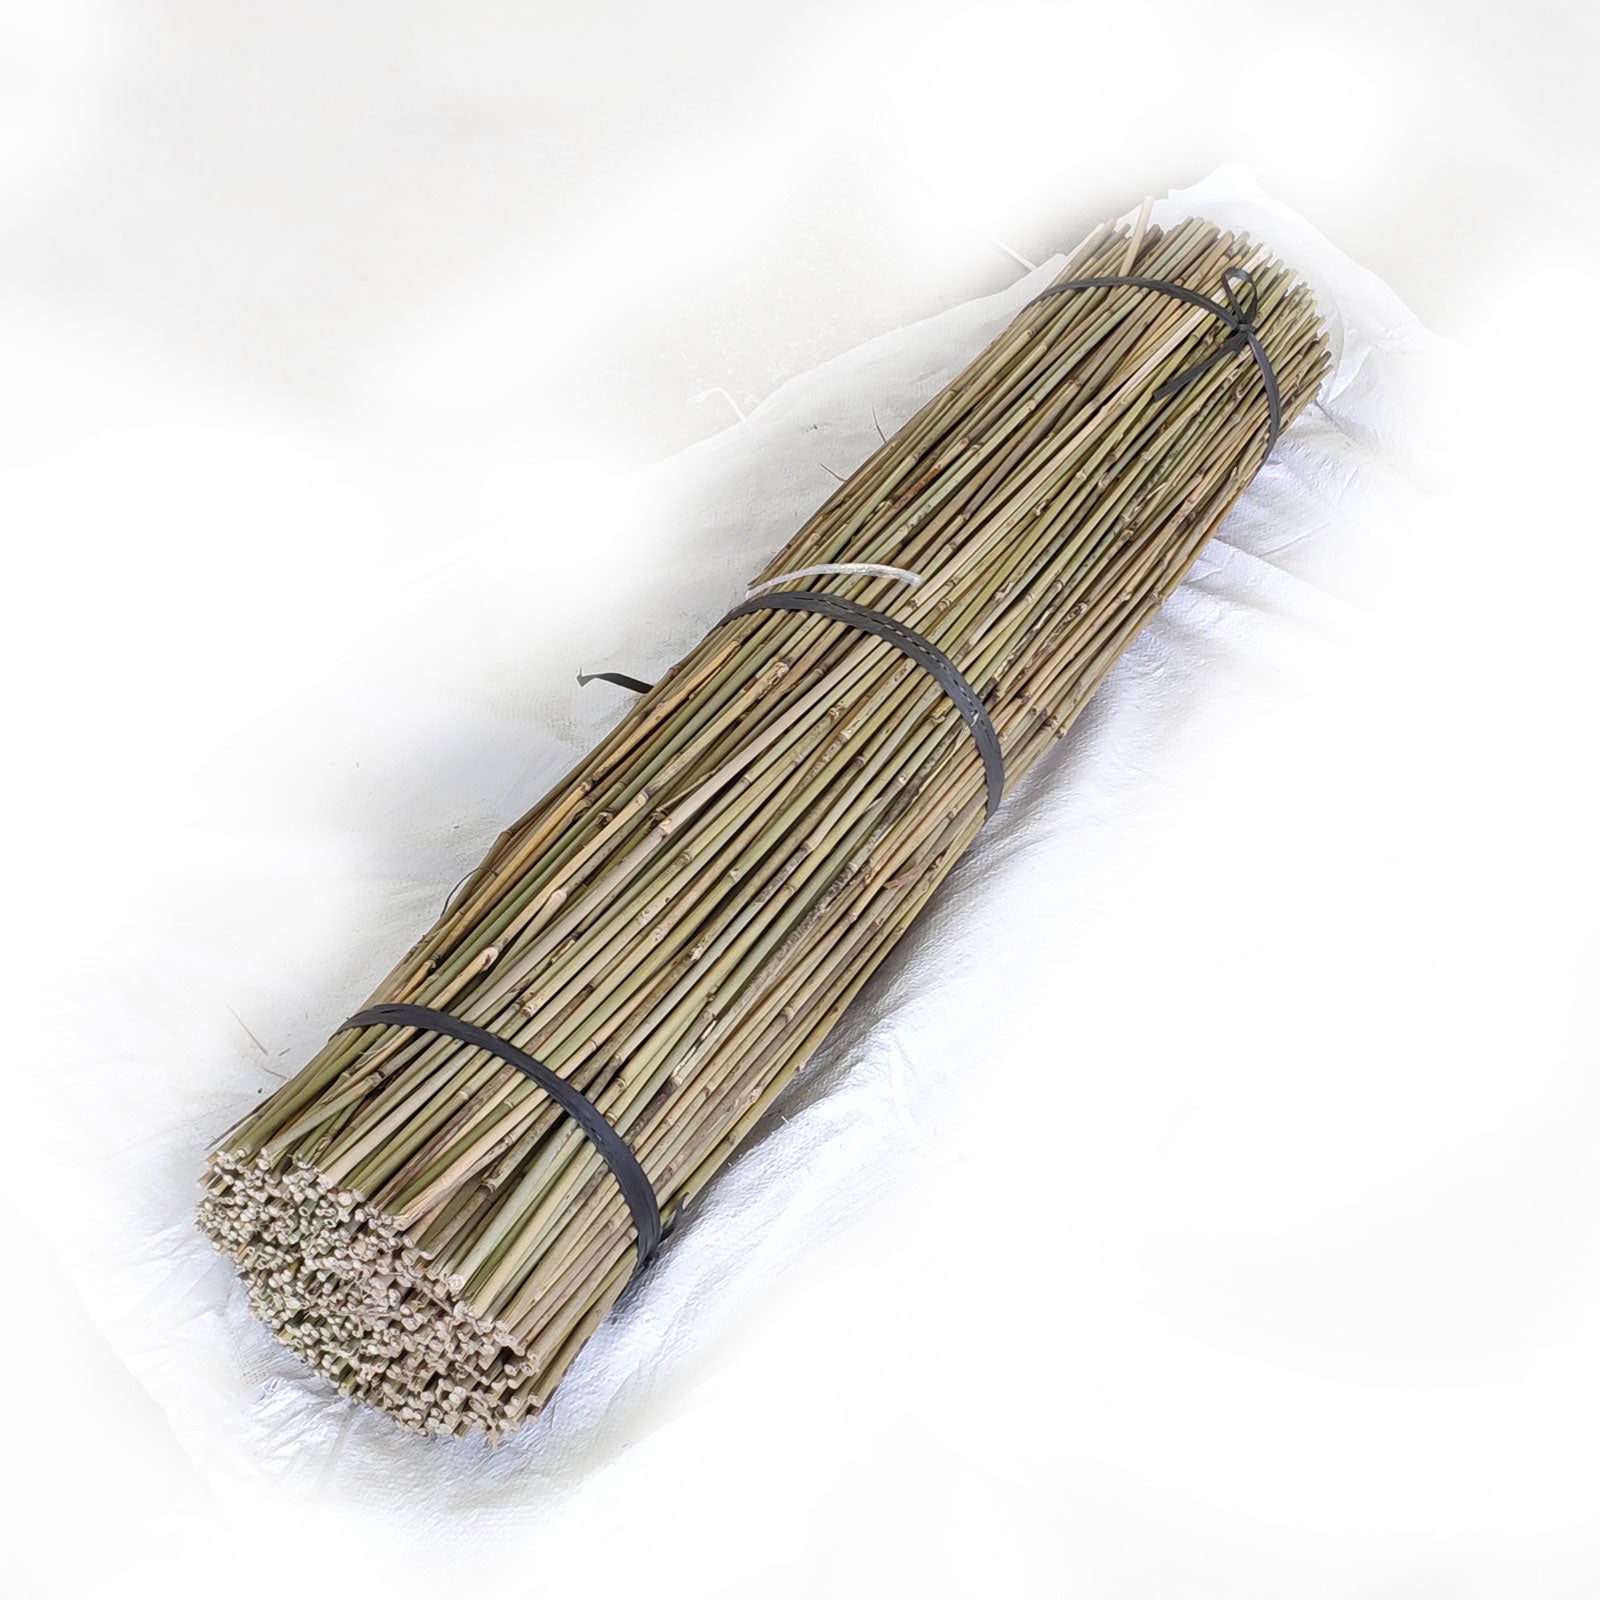 Tonkin Bamboo Stakes 4'L x 6-8 mm - Bundle of 500